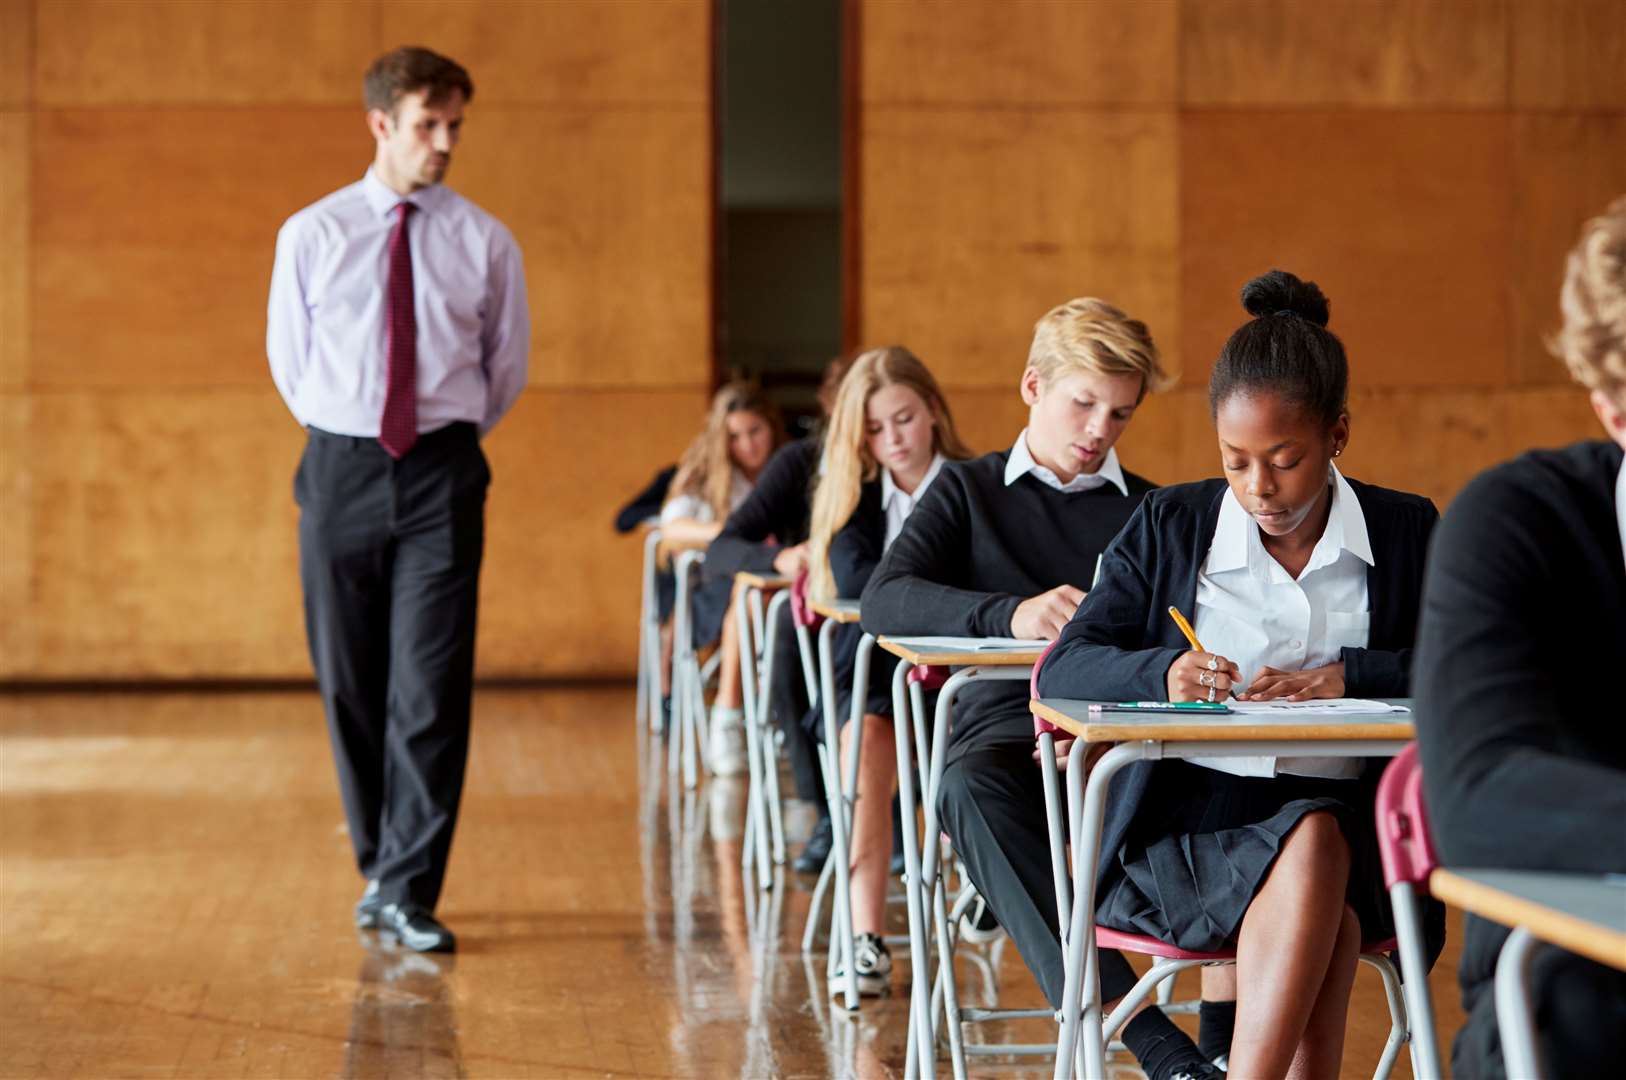 Students who don't obtain the required level in English and maths will face resits. Image: iStock.